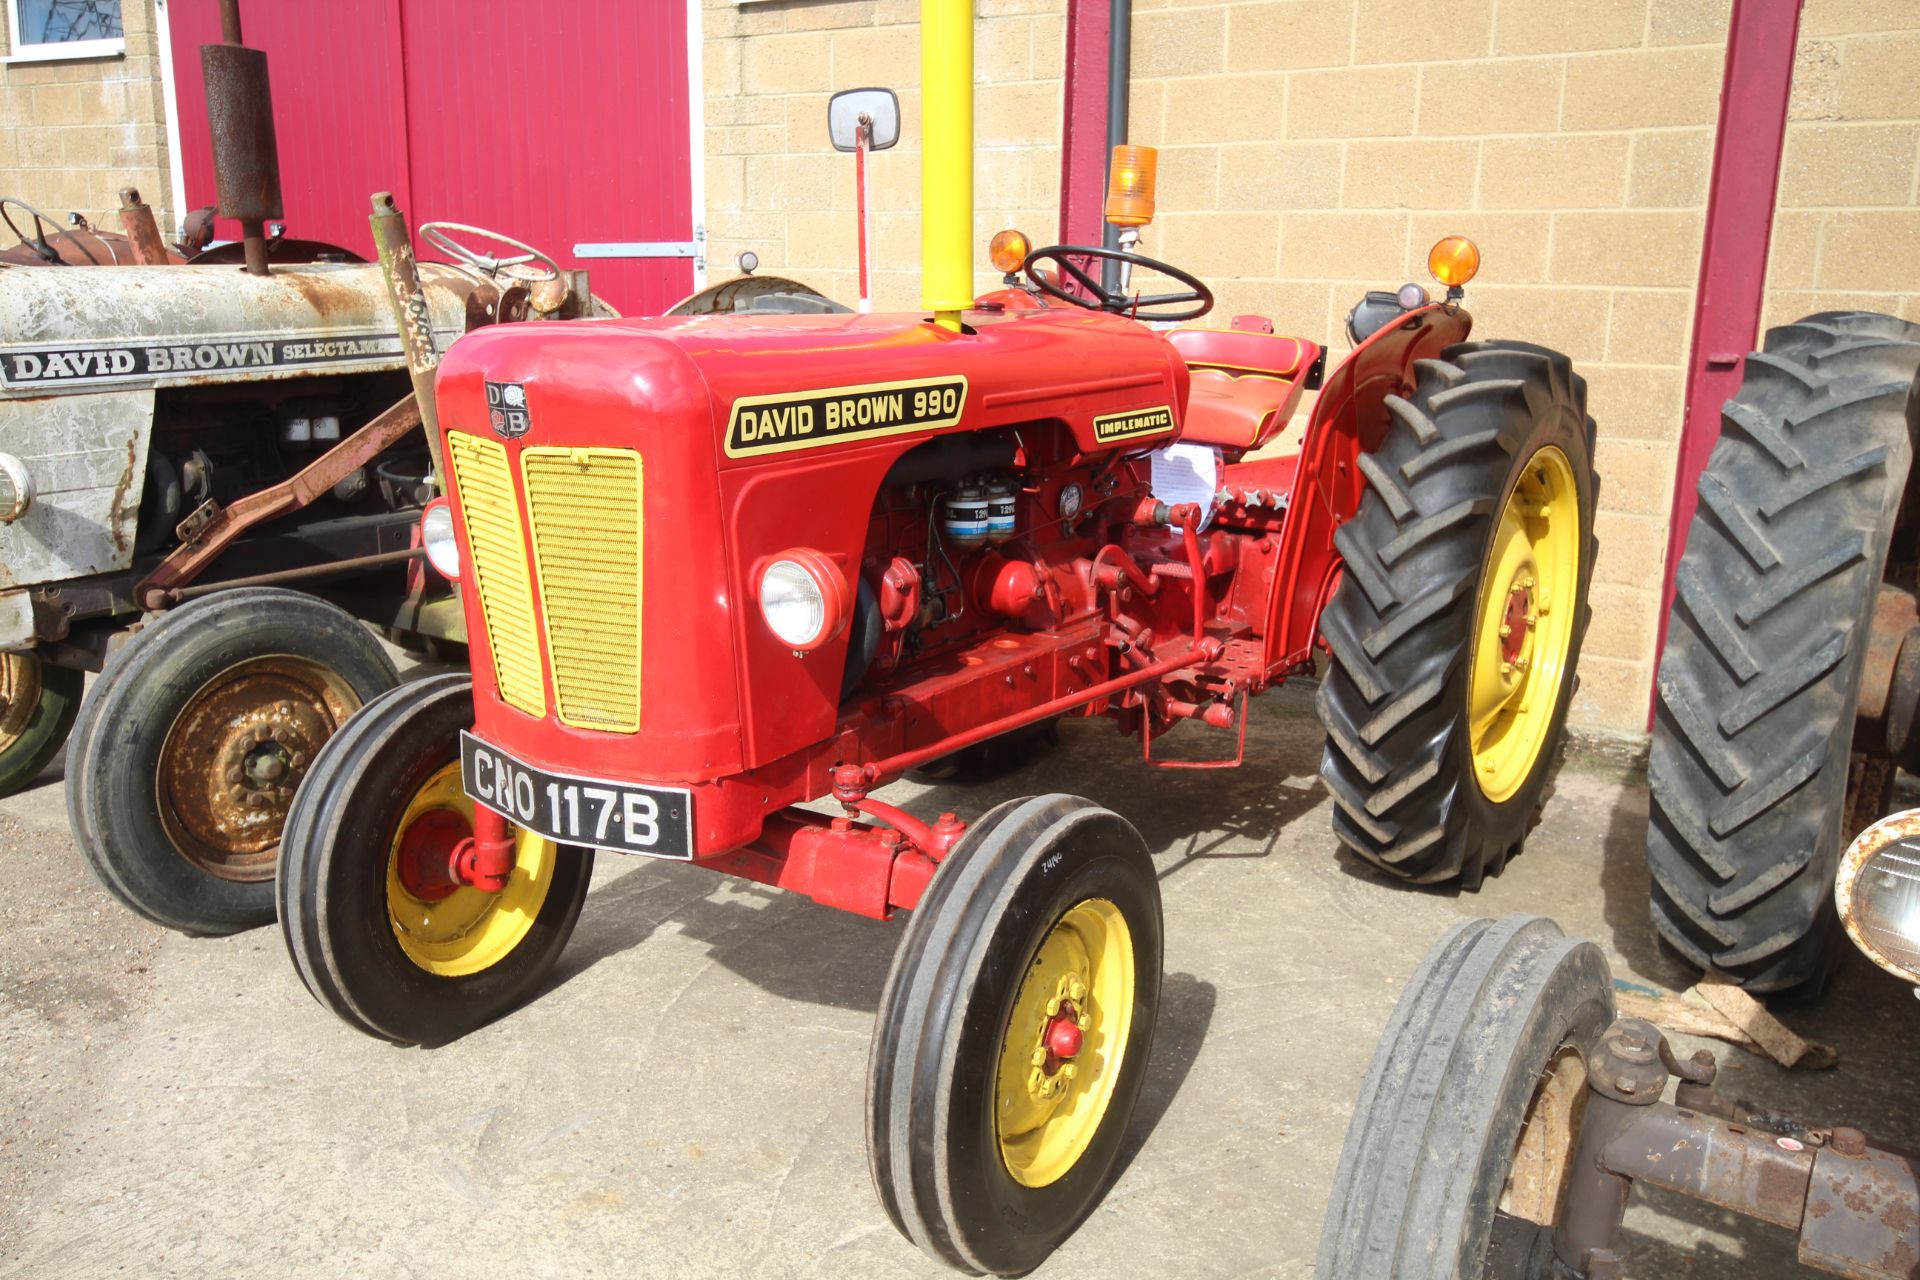 David Brown 990 Implematic live drive 2WD tractor. Registration CNO 117B. Date of first registration